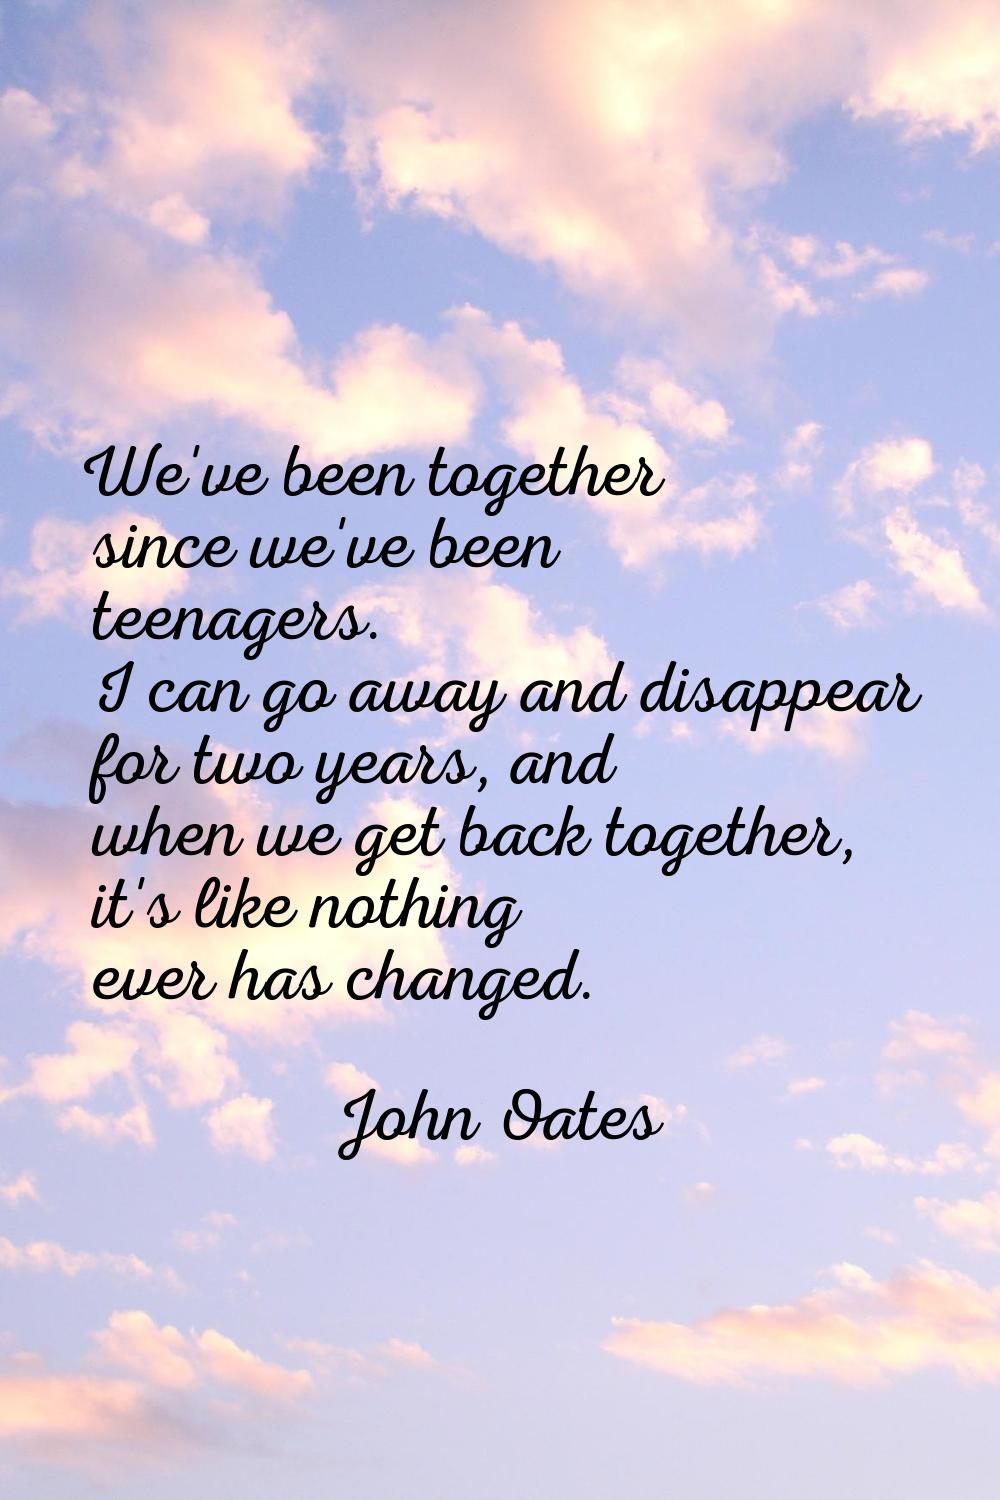 We've been together since we've been teenagers. I can go away and disappear for two years, and when